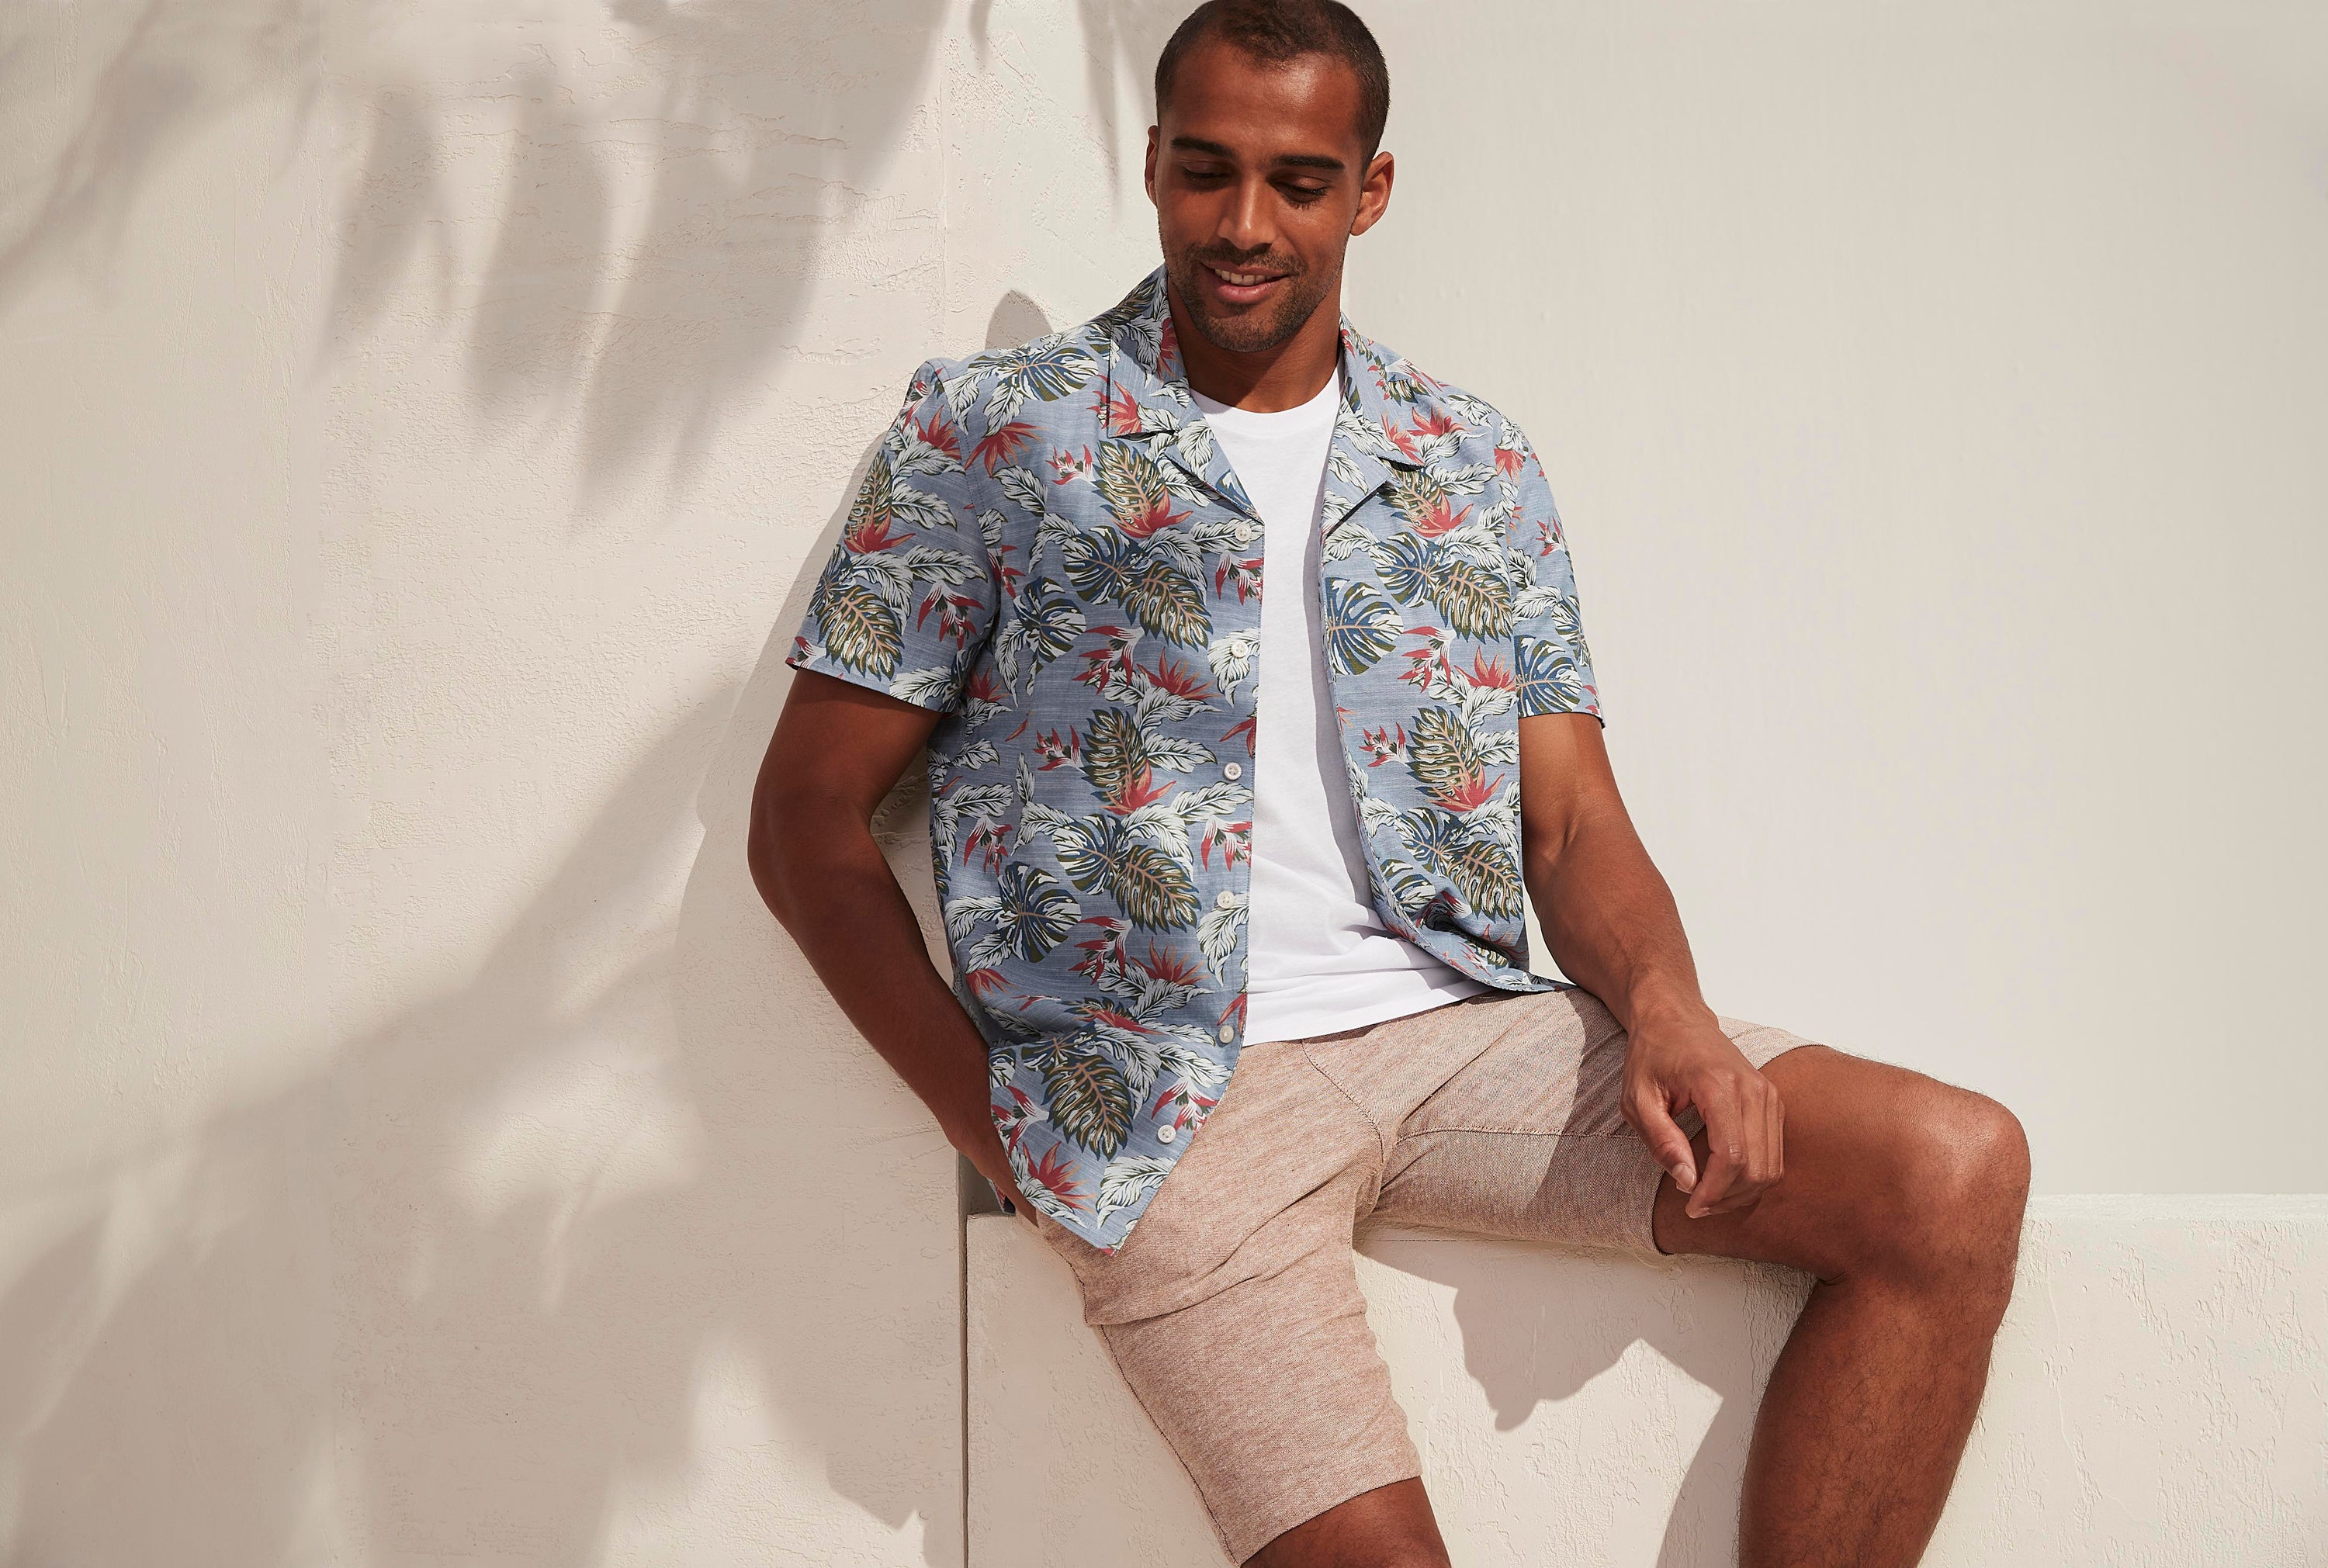 Summer style: 5 key menswear trends you need to know about